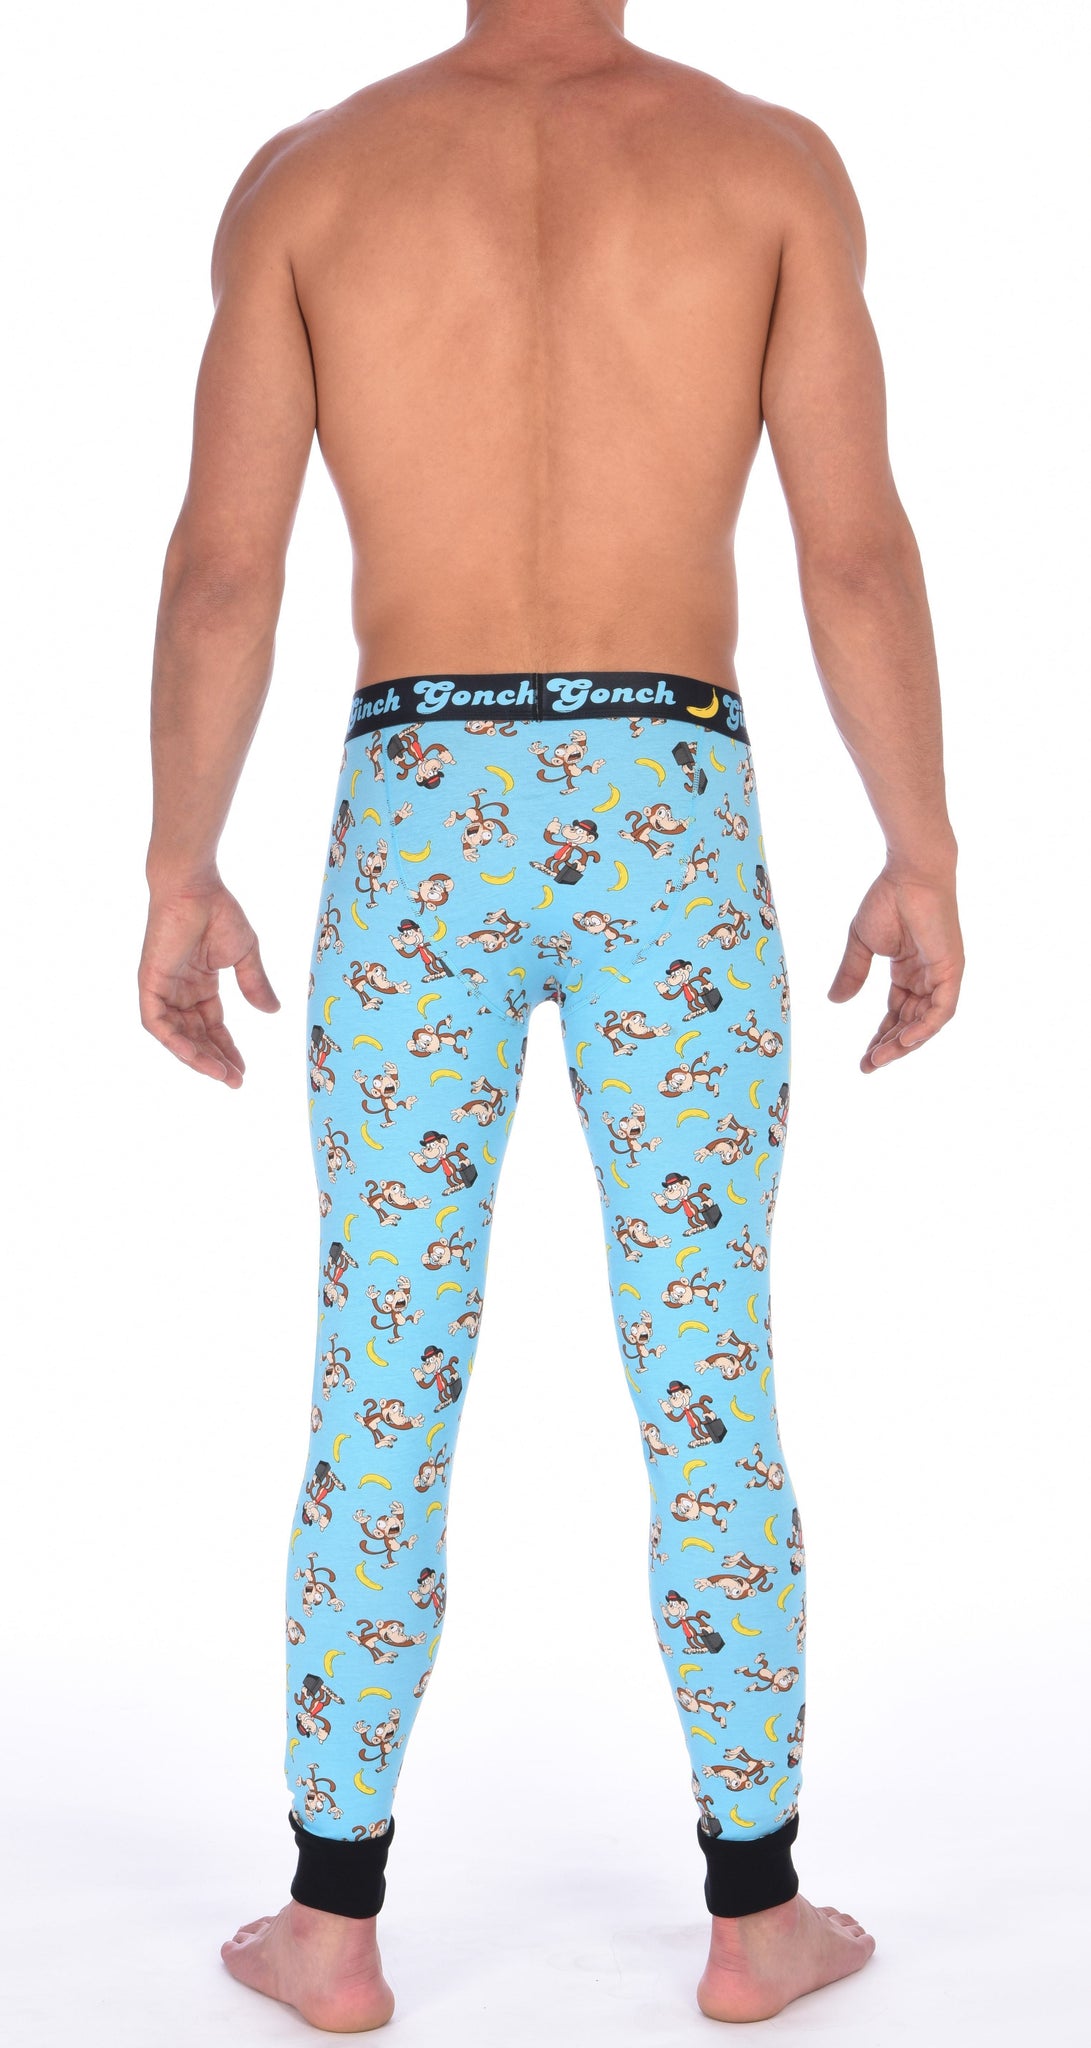 Ginch Gonch Monkey Business Men's Leggings Long Johns Underwear with blue background, monkeys, and bananas. Black trim and printed waistband with Ginch Gonch and bananas. Back.